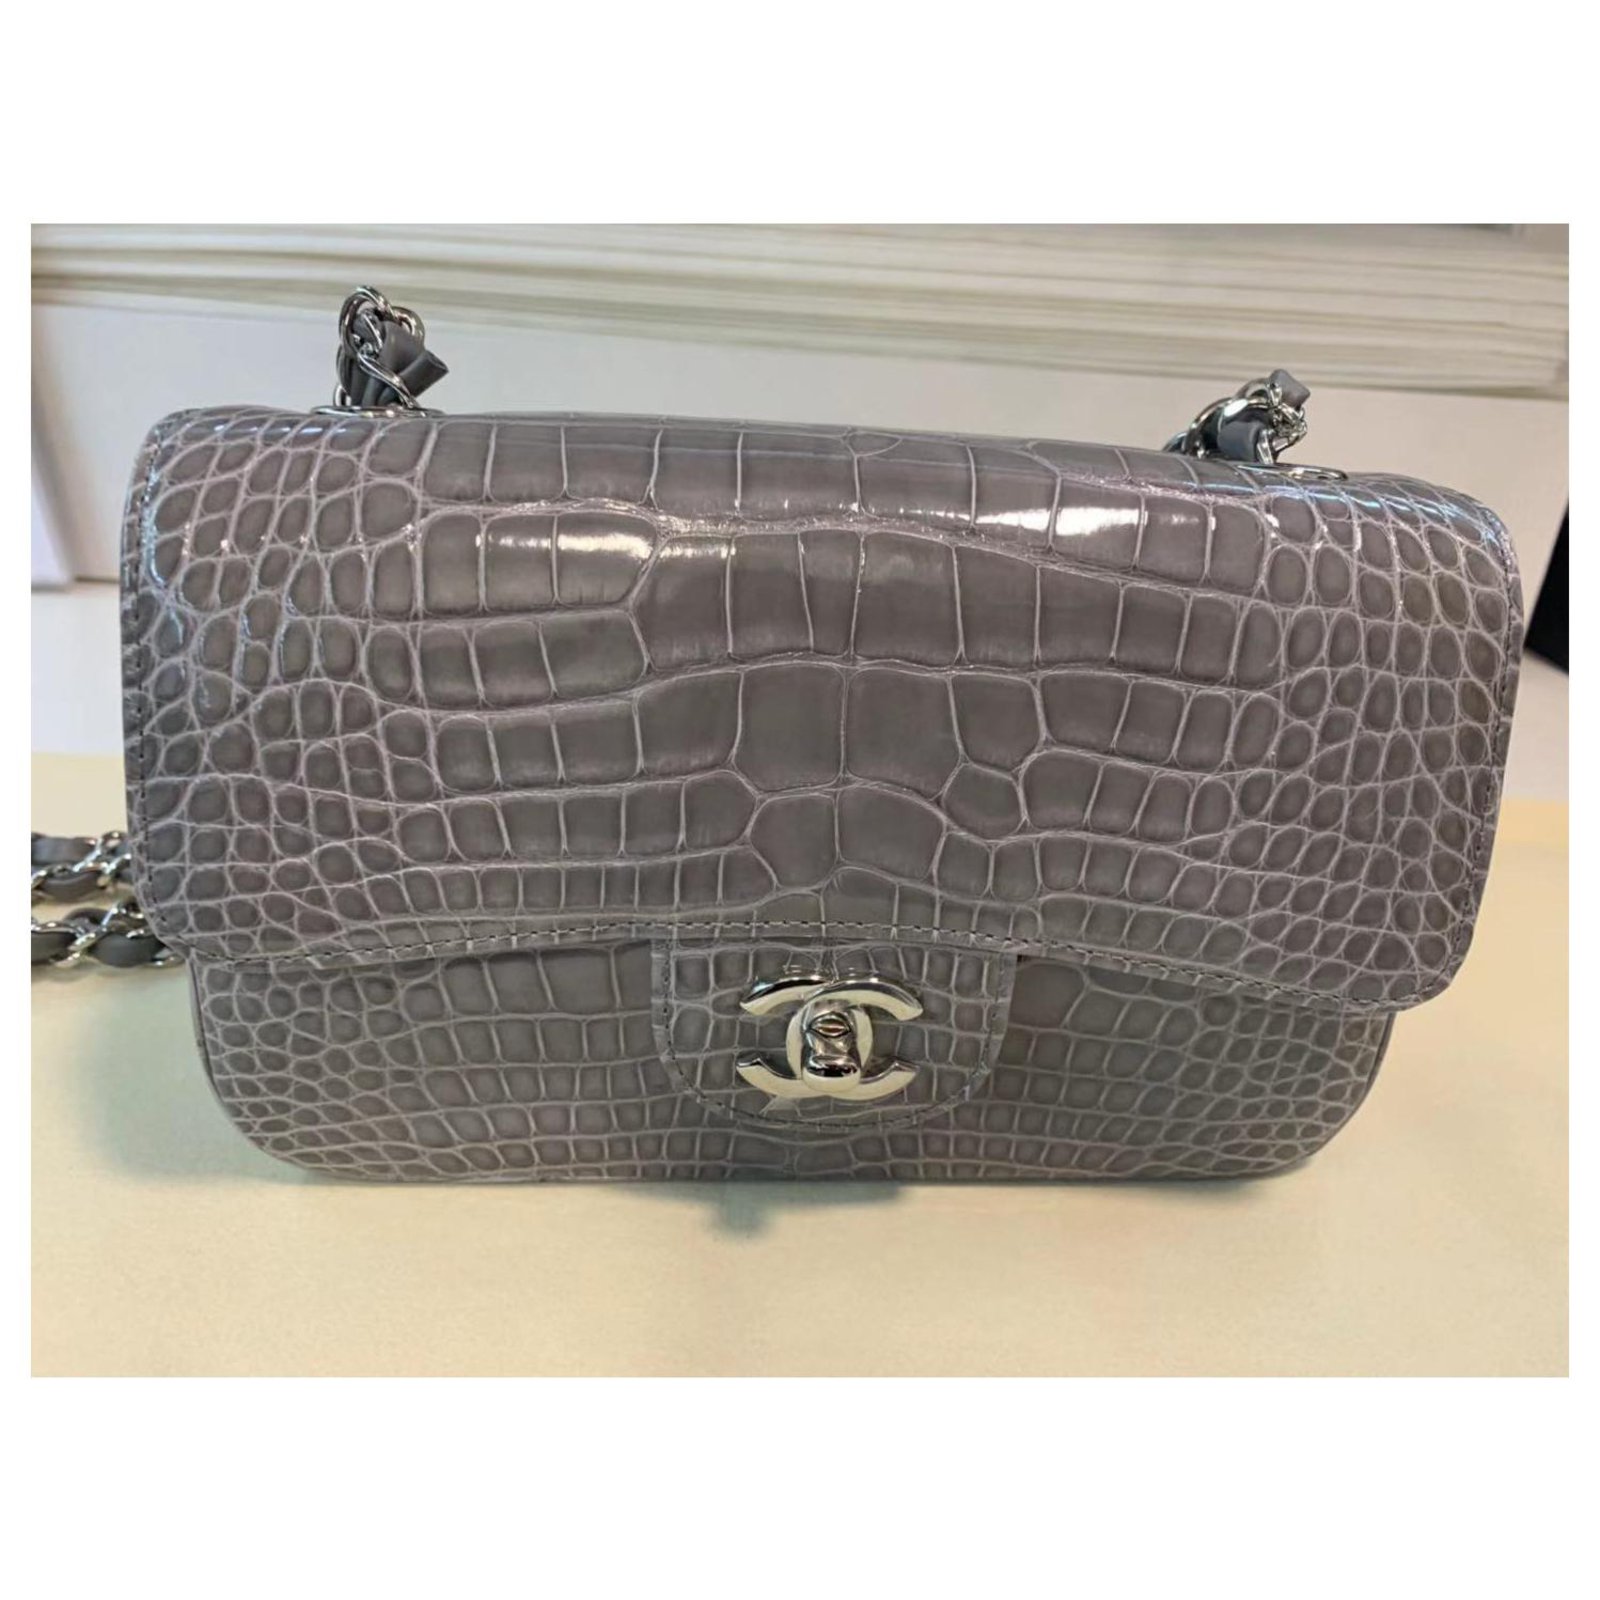 Timeless/classique leather handbag Chanel Grey in Leather - 24666647